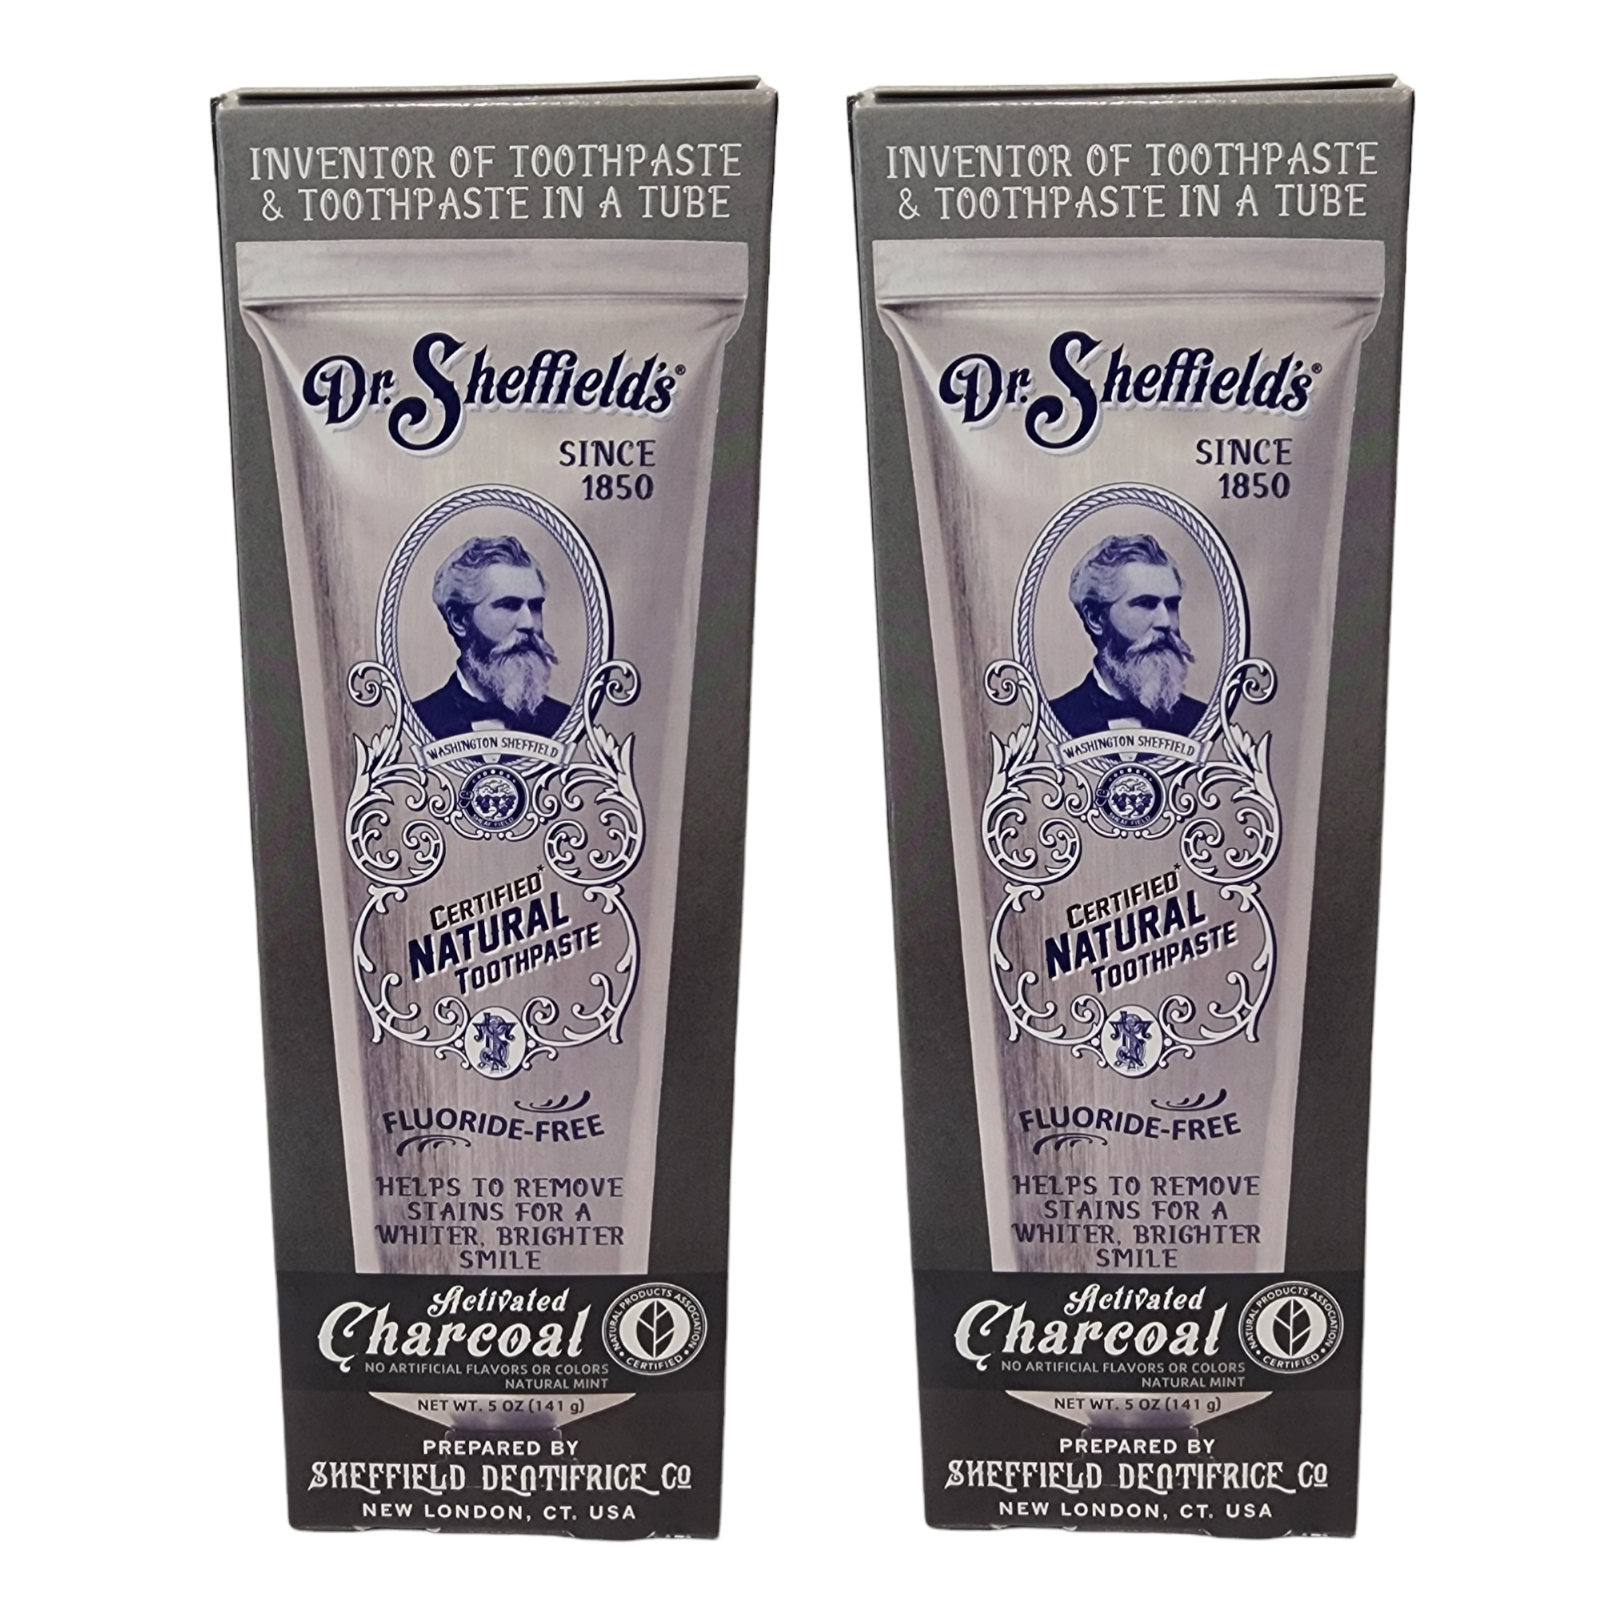 Dr Sheffields Fluoride Free Activated Charcoal Toothpaste Natural Mint 2 Pack DR.SHEFFIELD'S Activated Charcoal